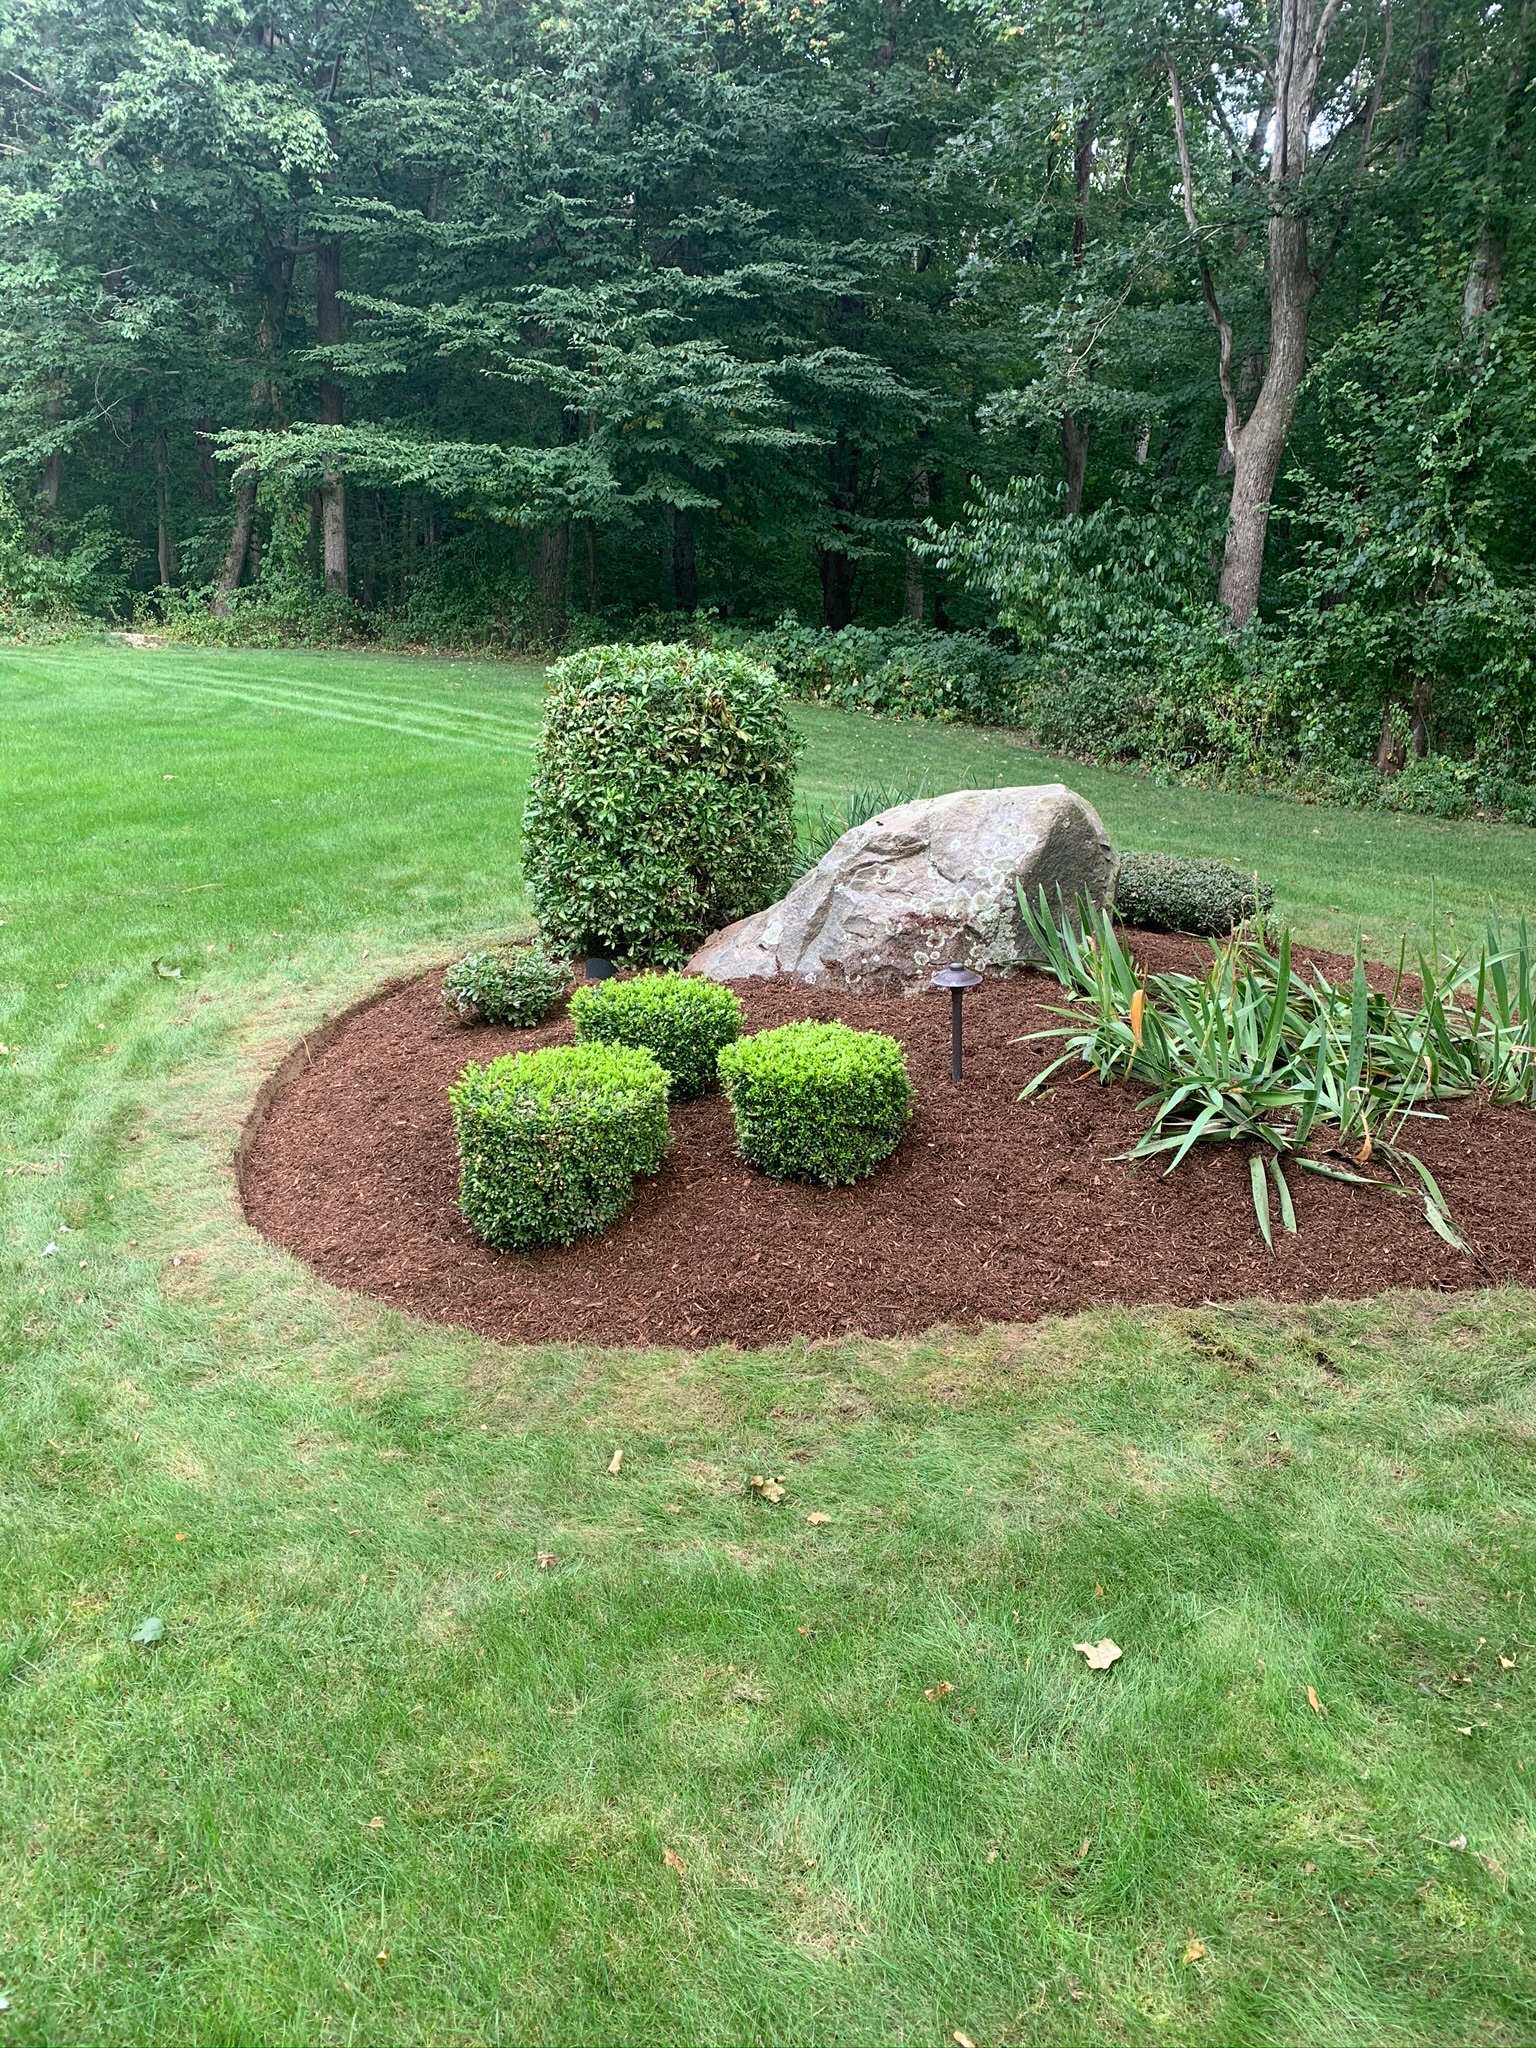 Planting bed in yard with mulch, plants, and a rock